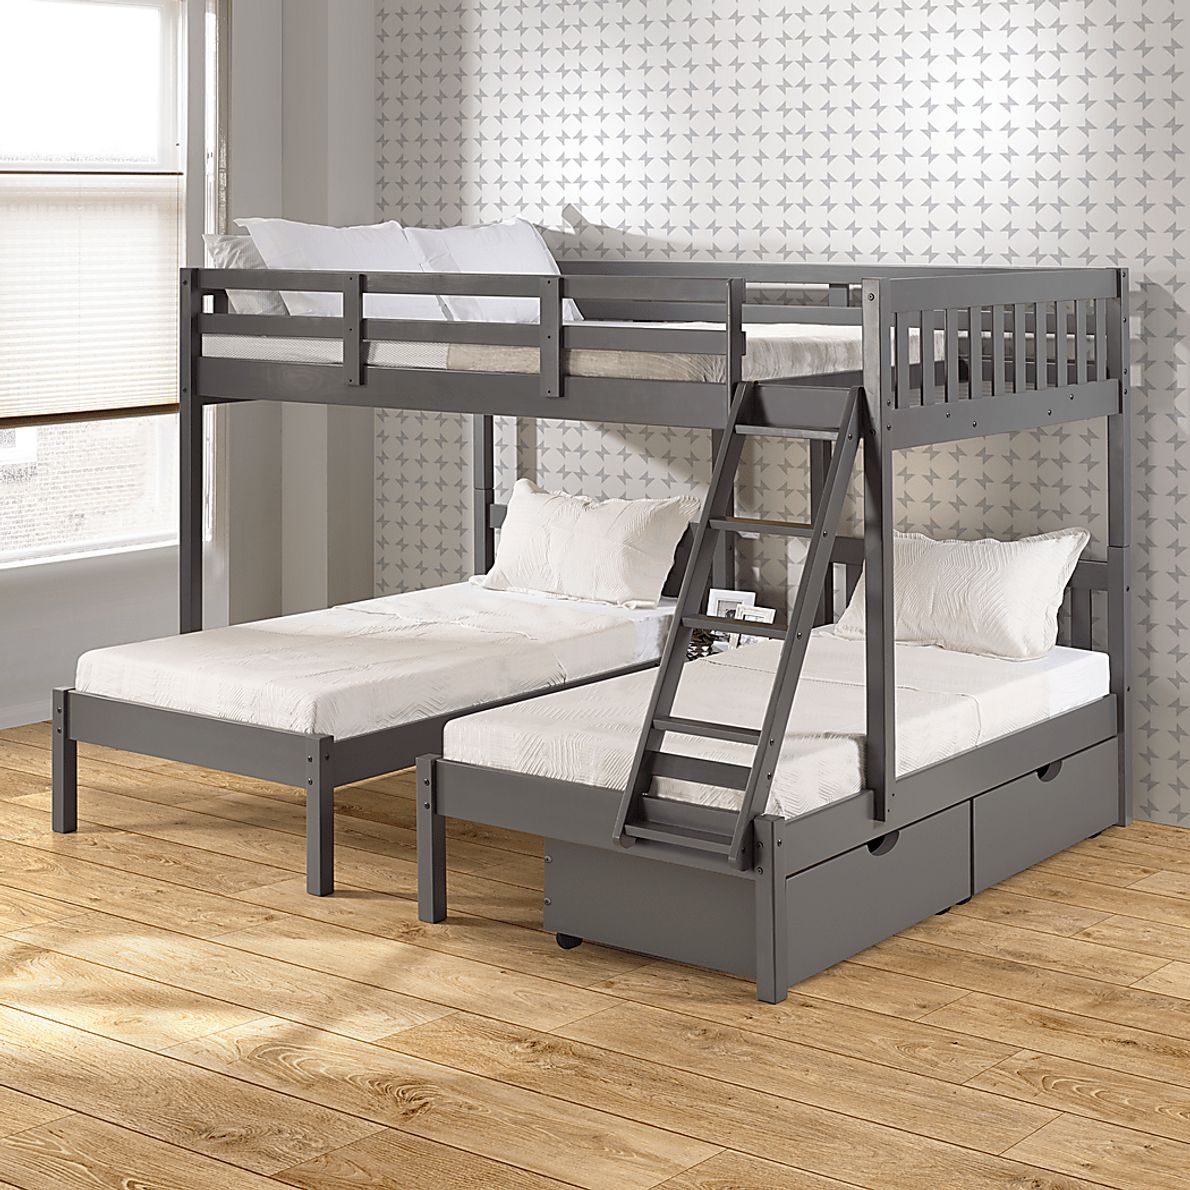 Kids Courville Gray Full/Double Twin Bunk Bed